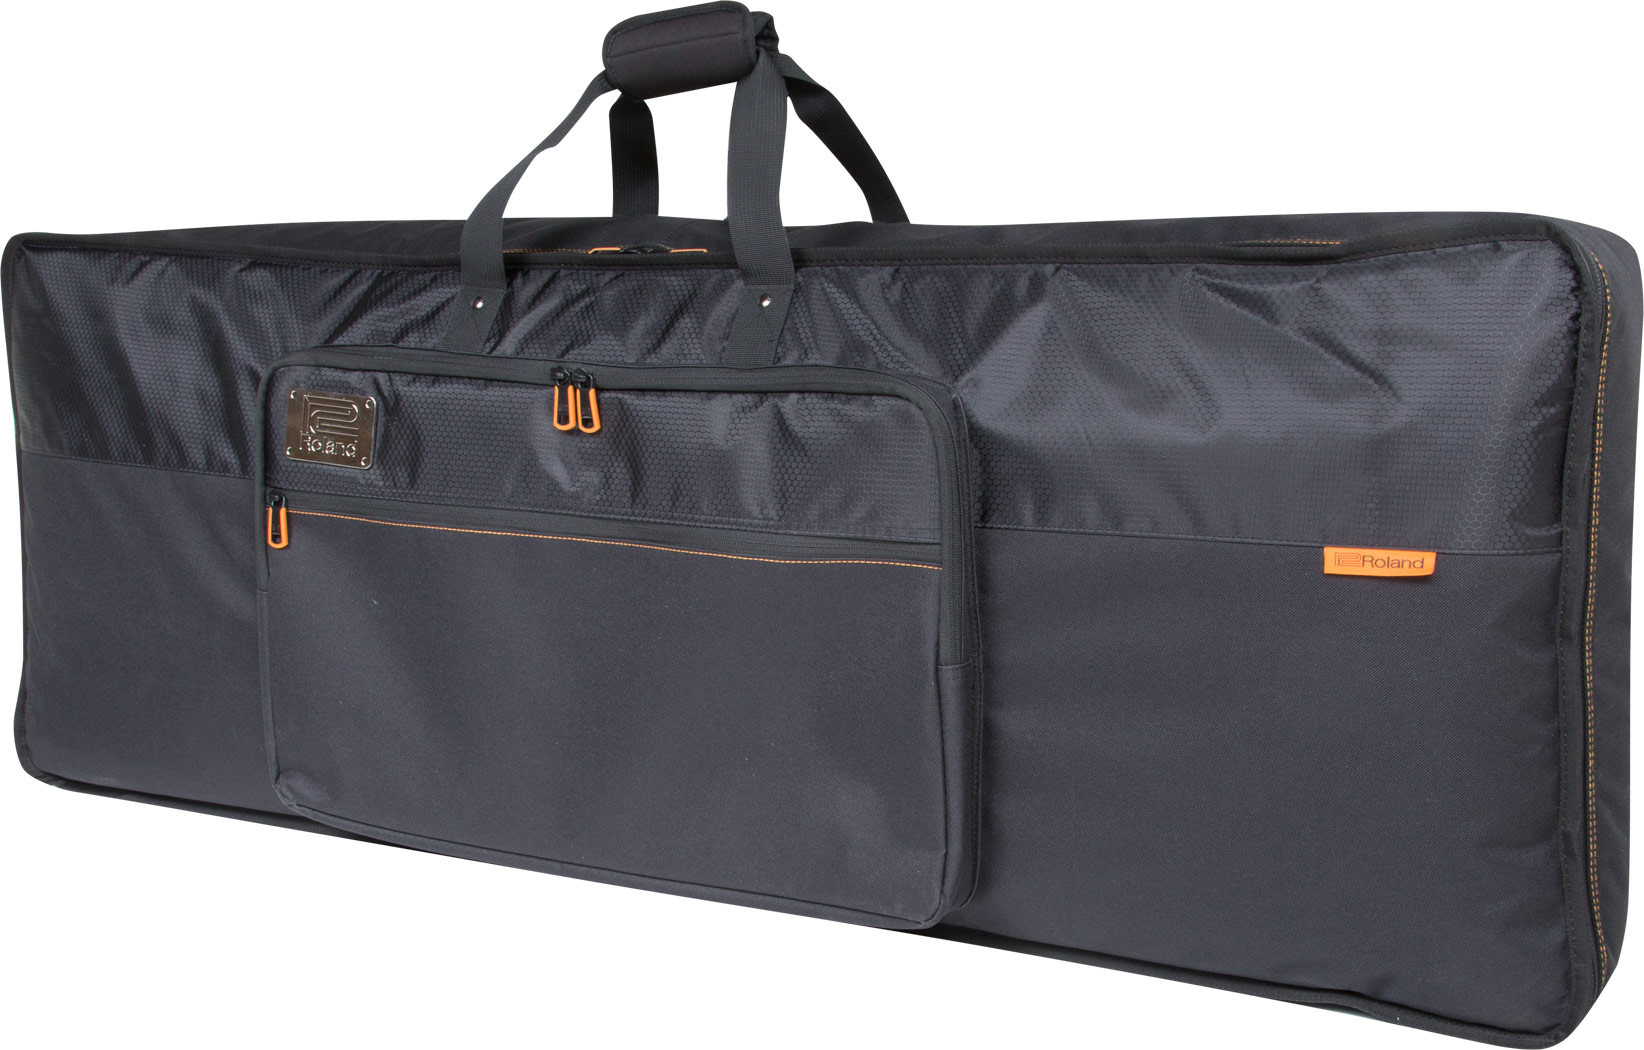 Roland CB-B49D - 49-KEY KEYBOARD BAG WITH BACKPACK STRAPS - DEEP